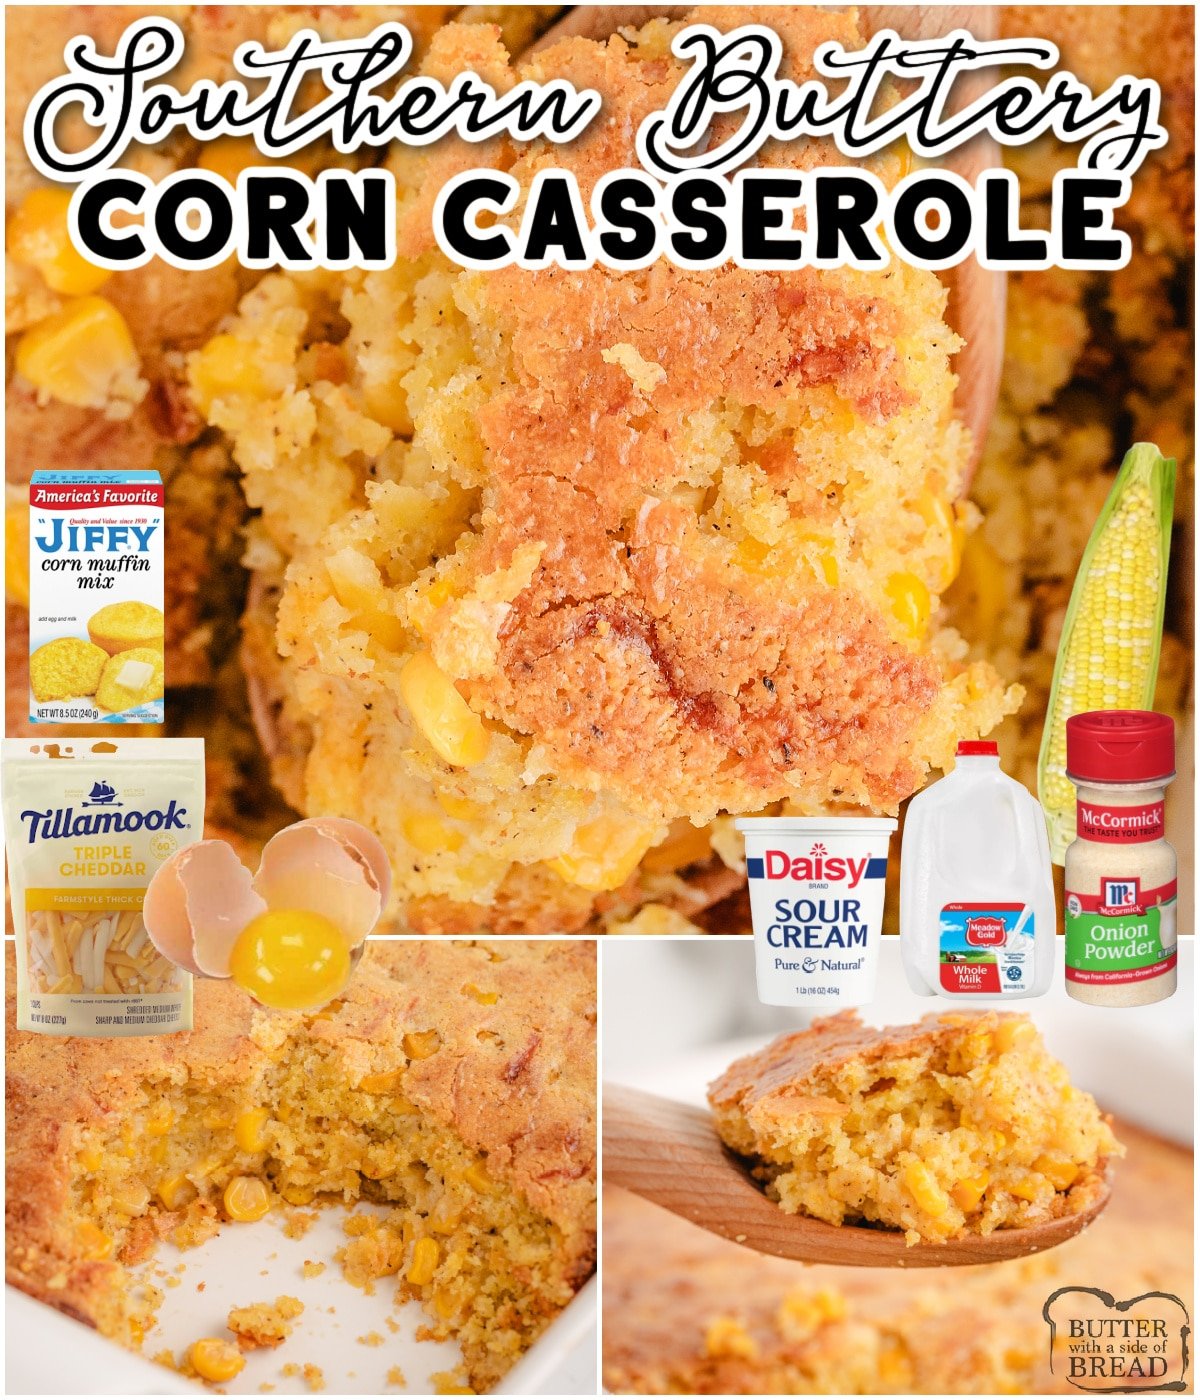 Buttery Southern Corn Casserole is made with corn, Jiffy muffin mix, butter, sour cream, & seasonings for a fantastic holiday side dish! Flavorful baked corn casserole that's easy to make!